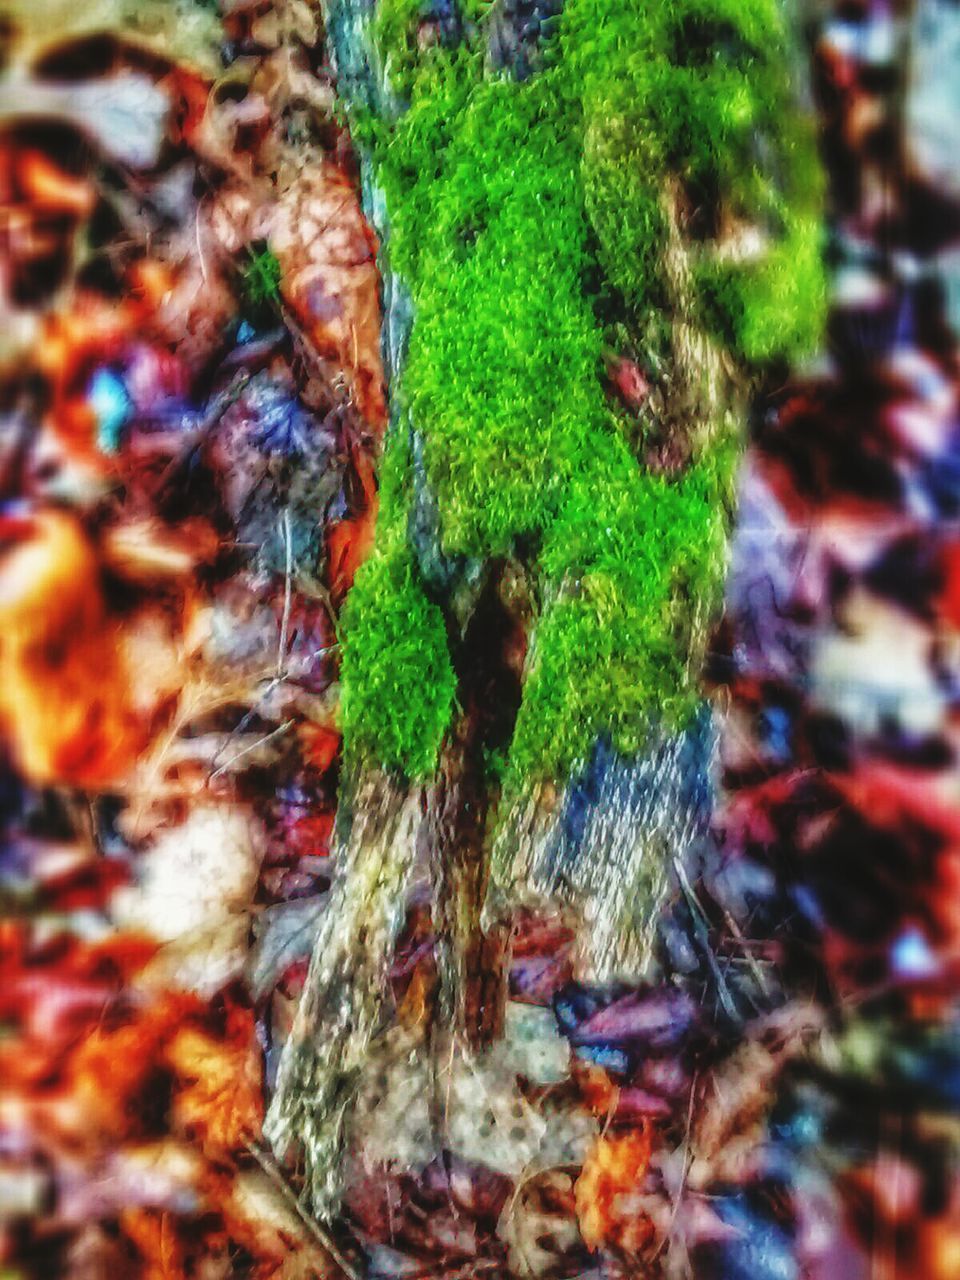 CLOSE-UP OF MOSS ON TREE TRUNK